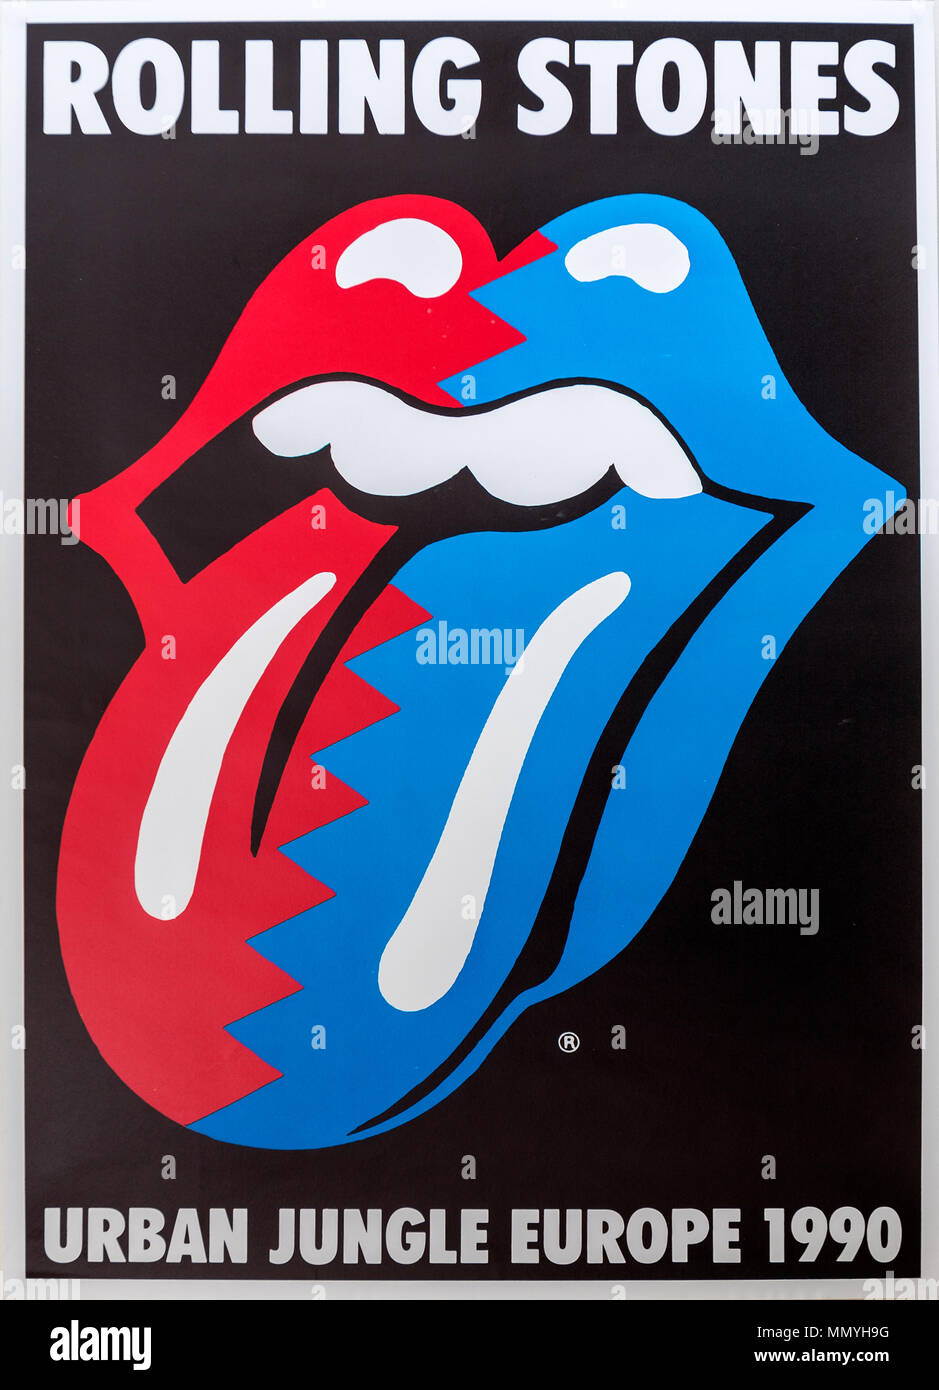 Rolling Stones Urban Jungle tour, Europe 1990 Munchen Olympiastadion,  Musical concert poster Stock Photo